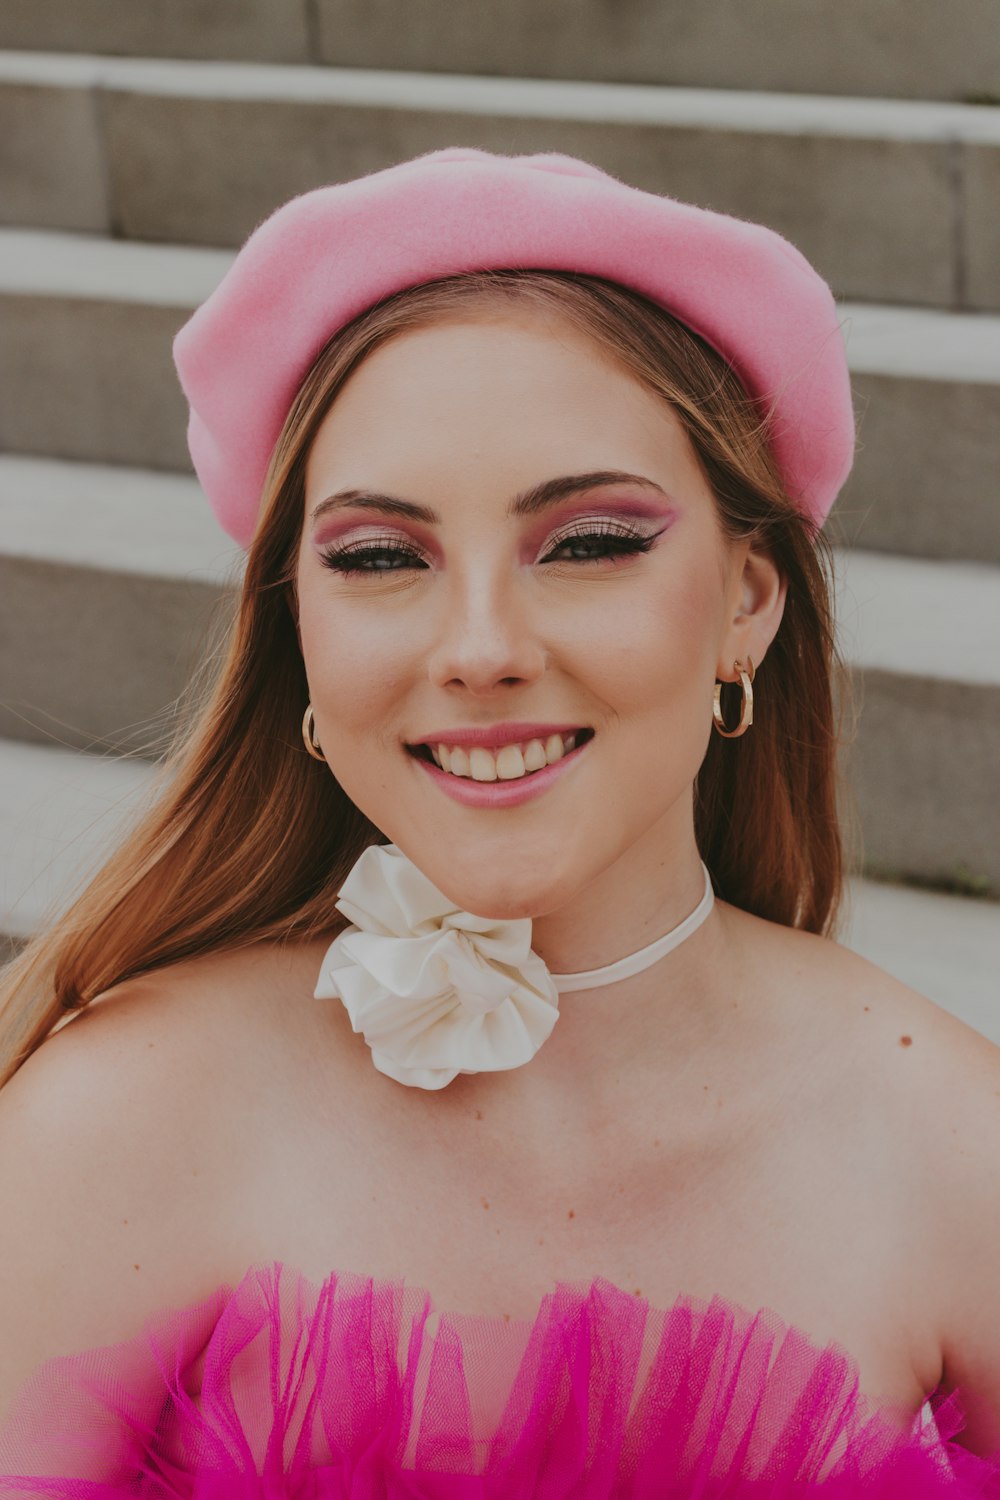 a woman wearing a pink hat and a pink dress